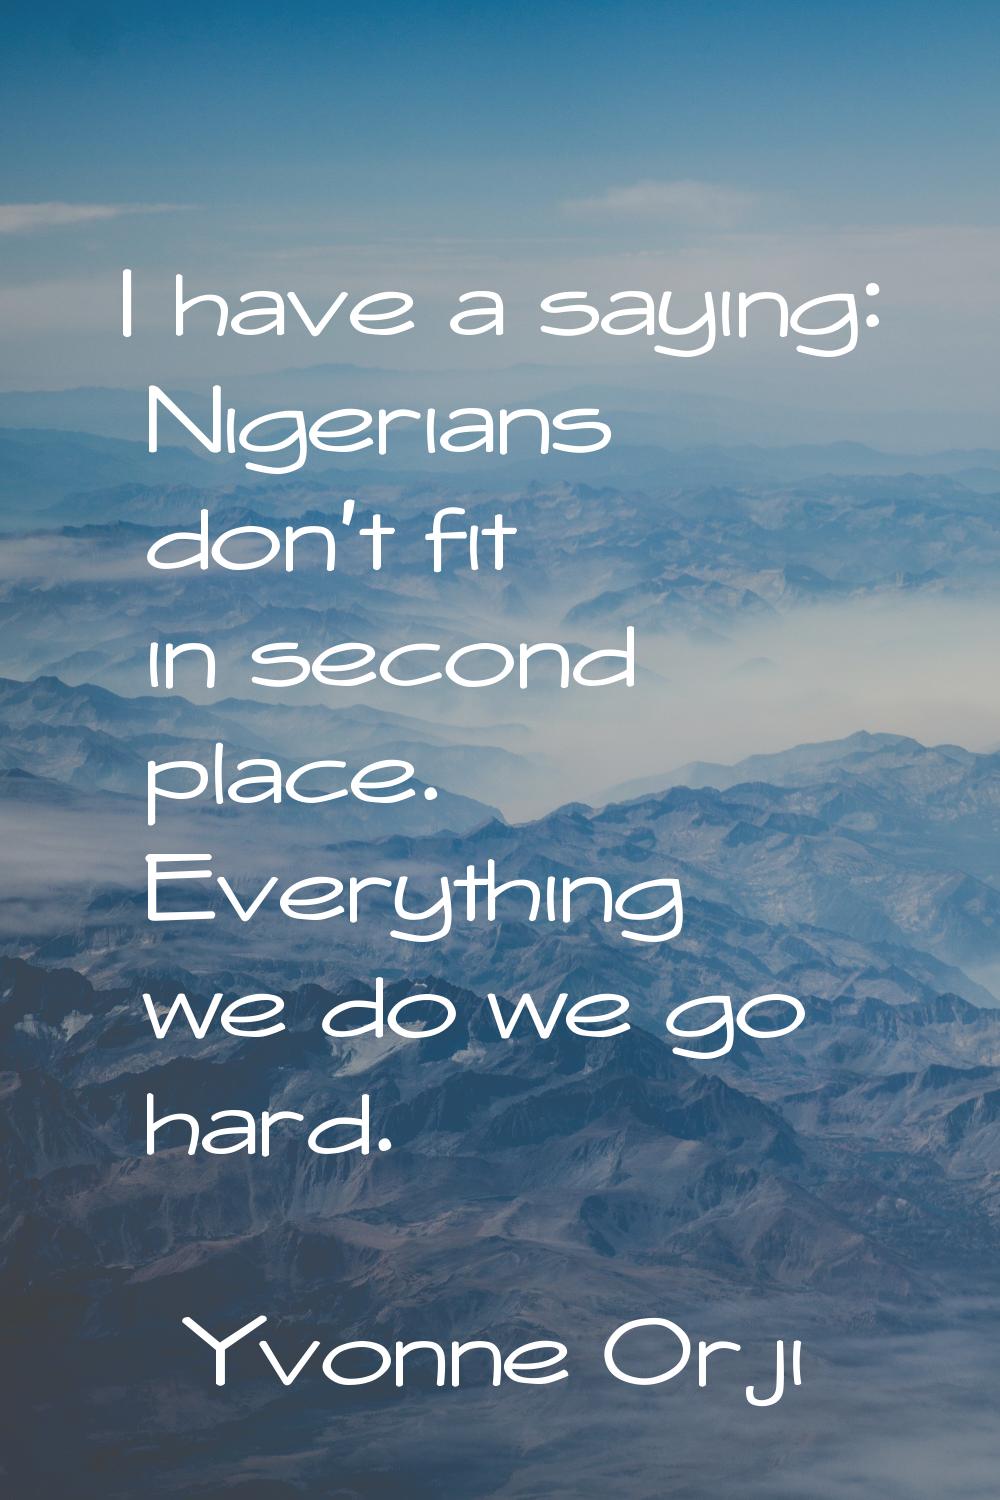 I have a saying: Nigerians don't fit in second place. Everything we do we go hard.